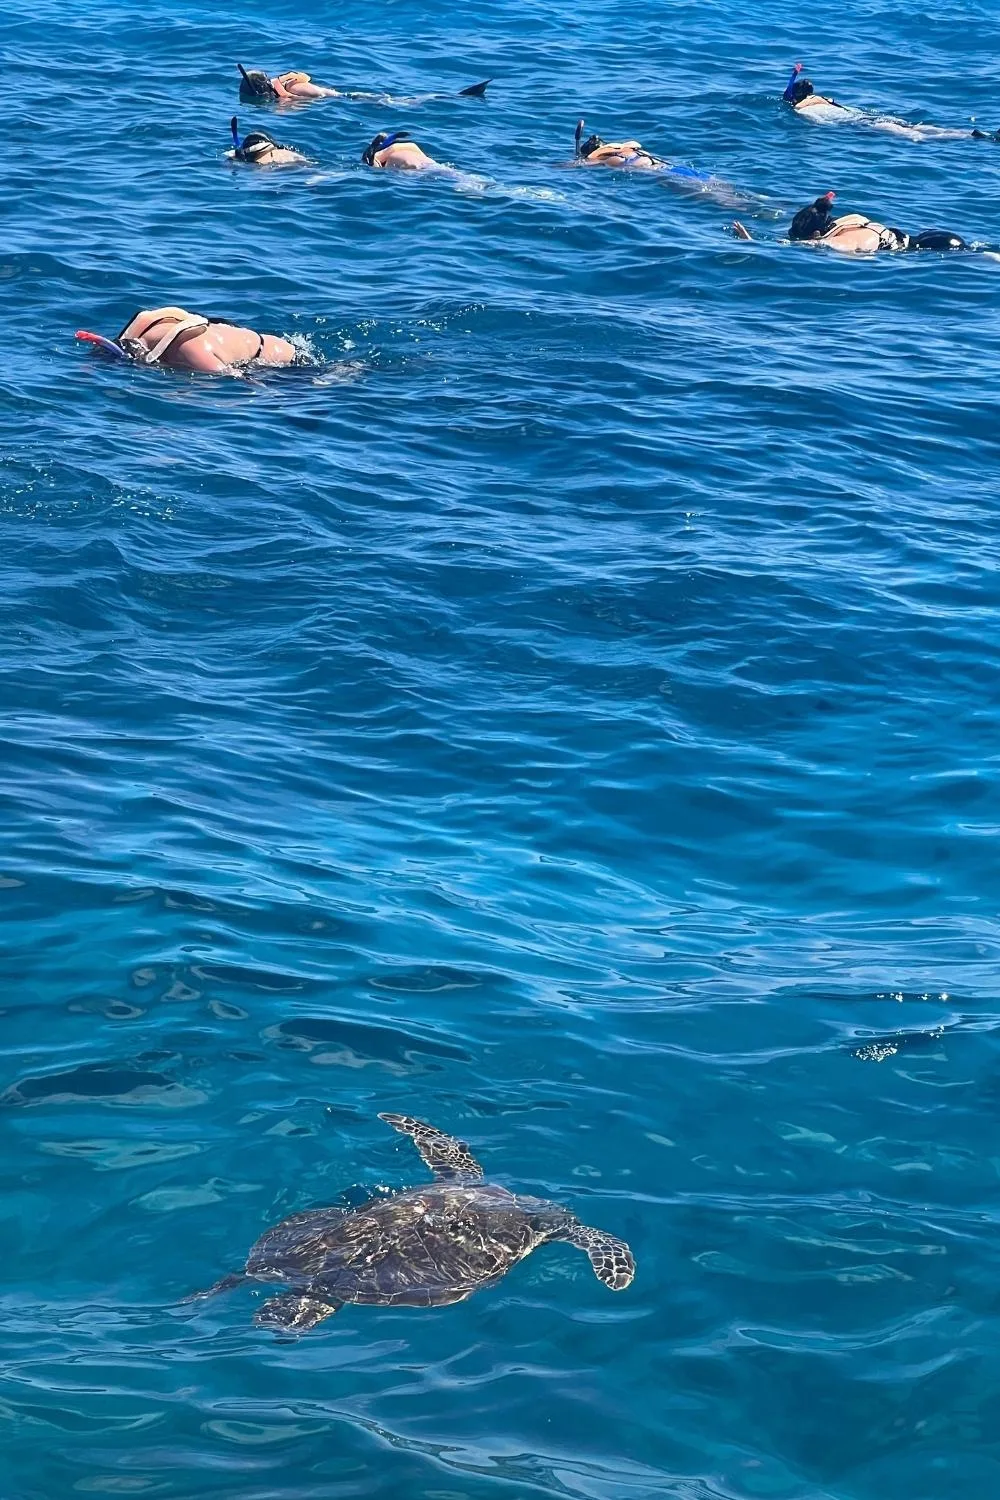 People snorkeling at Turtle Canyon off of Oahu, while a sea turtle swims by.